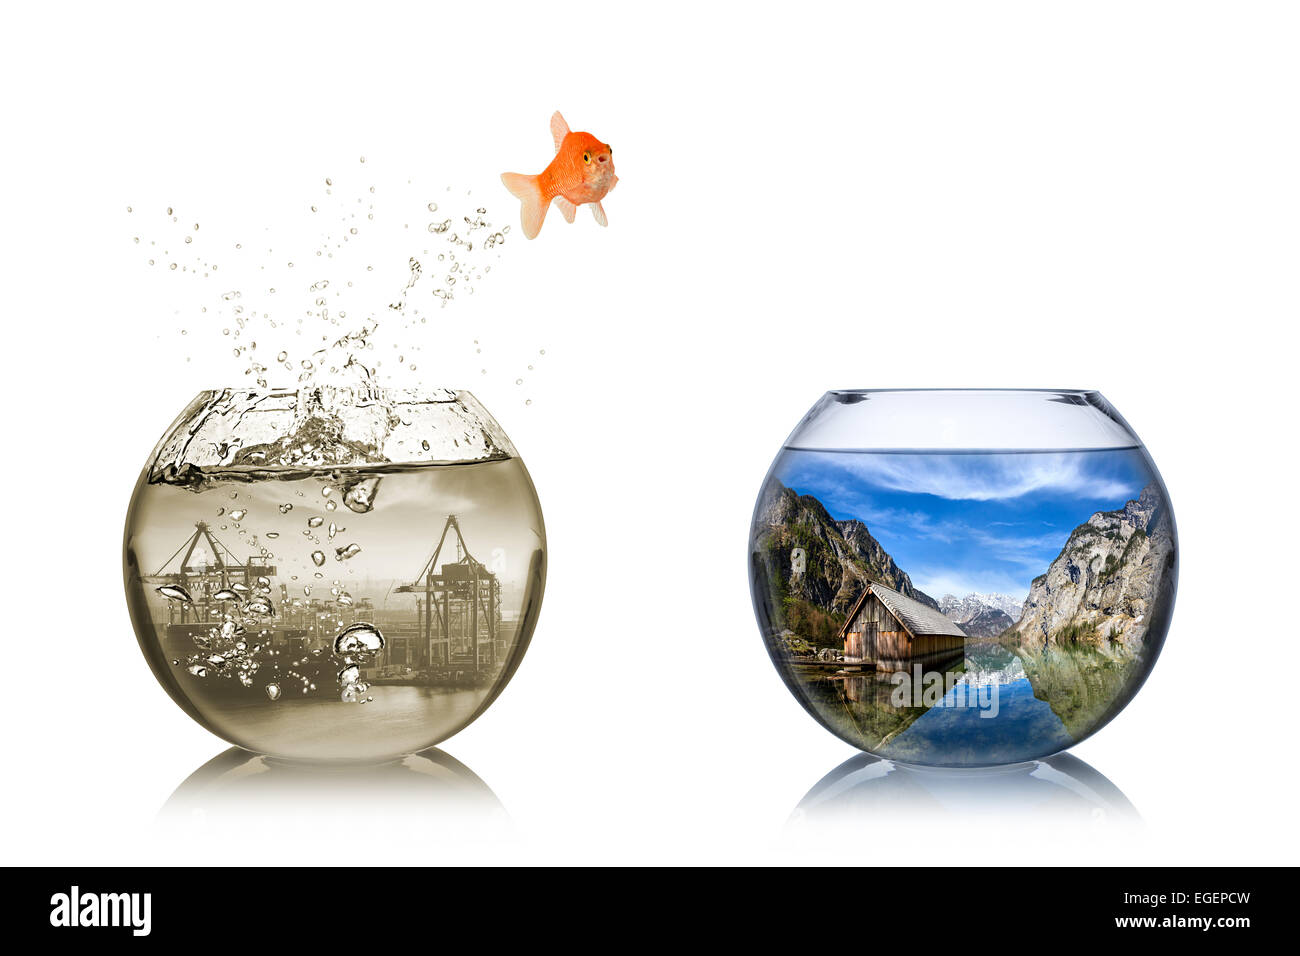 fish rethink and change concept Stock Photo